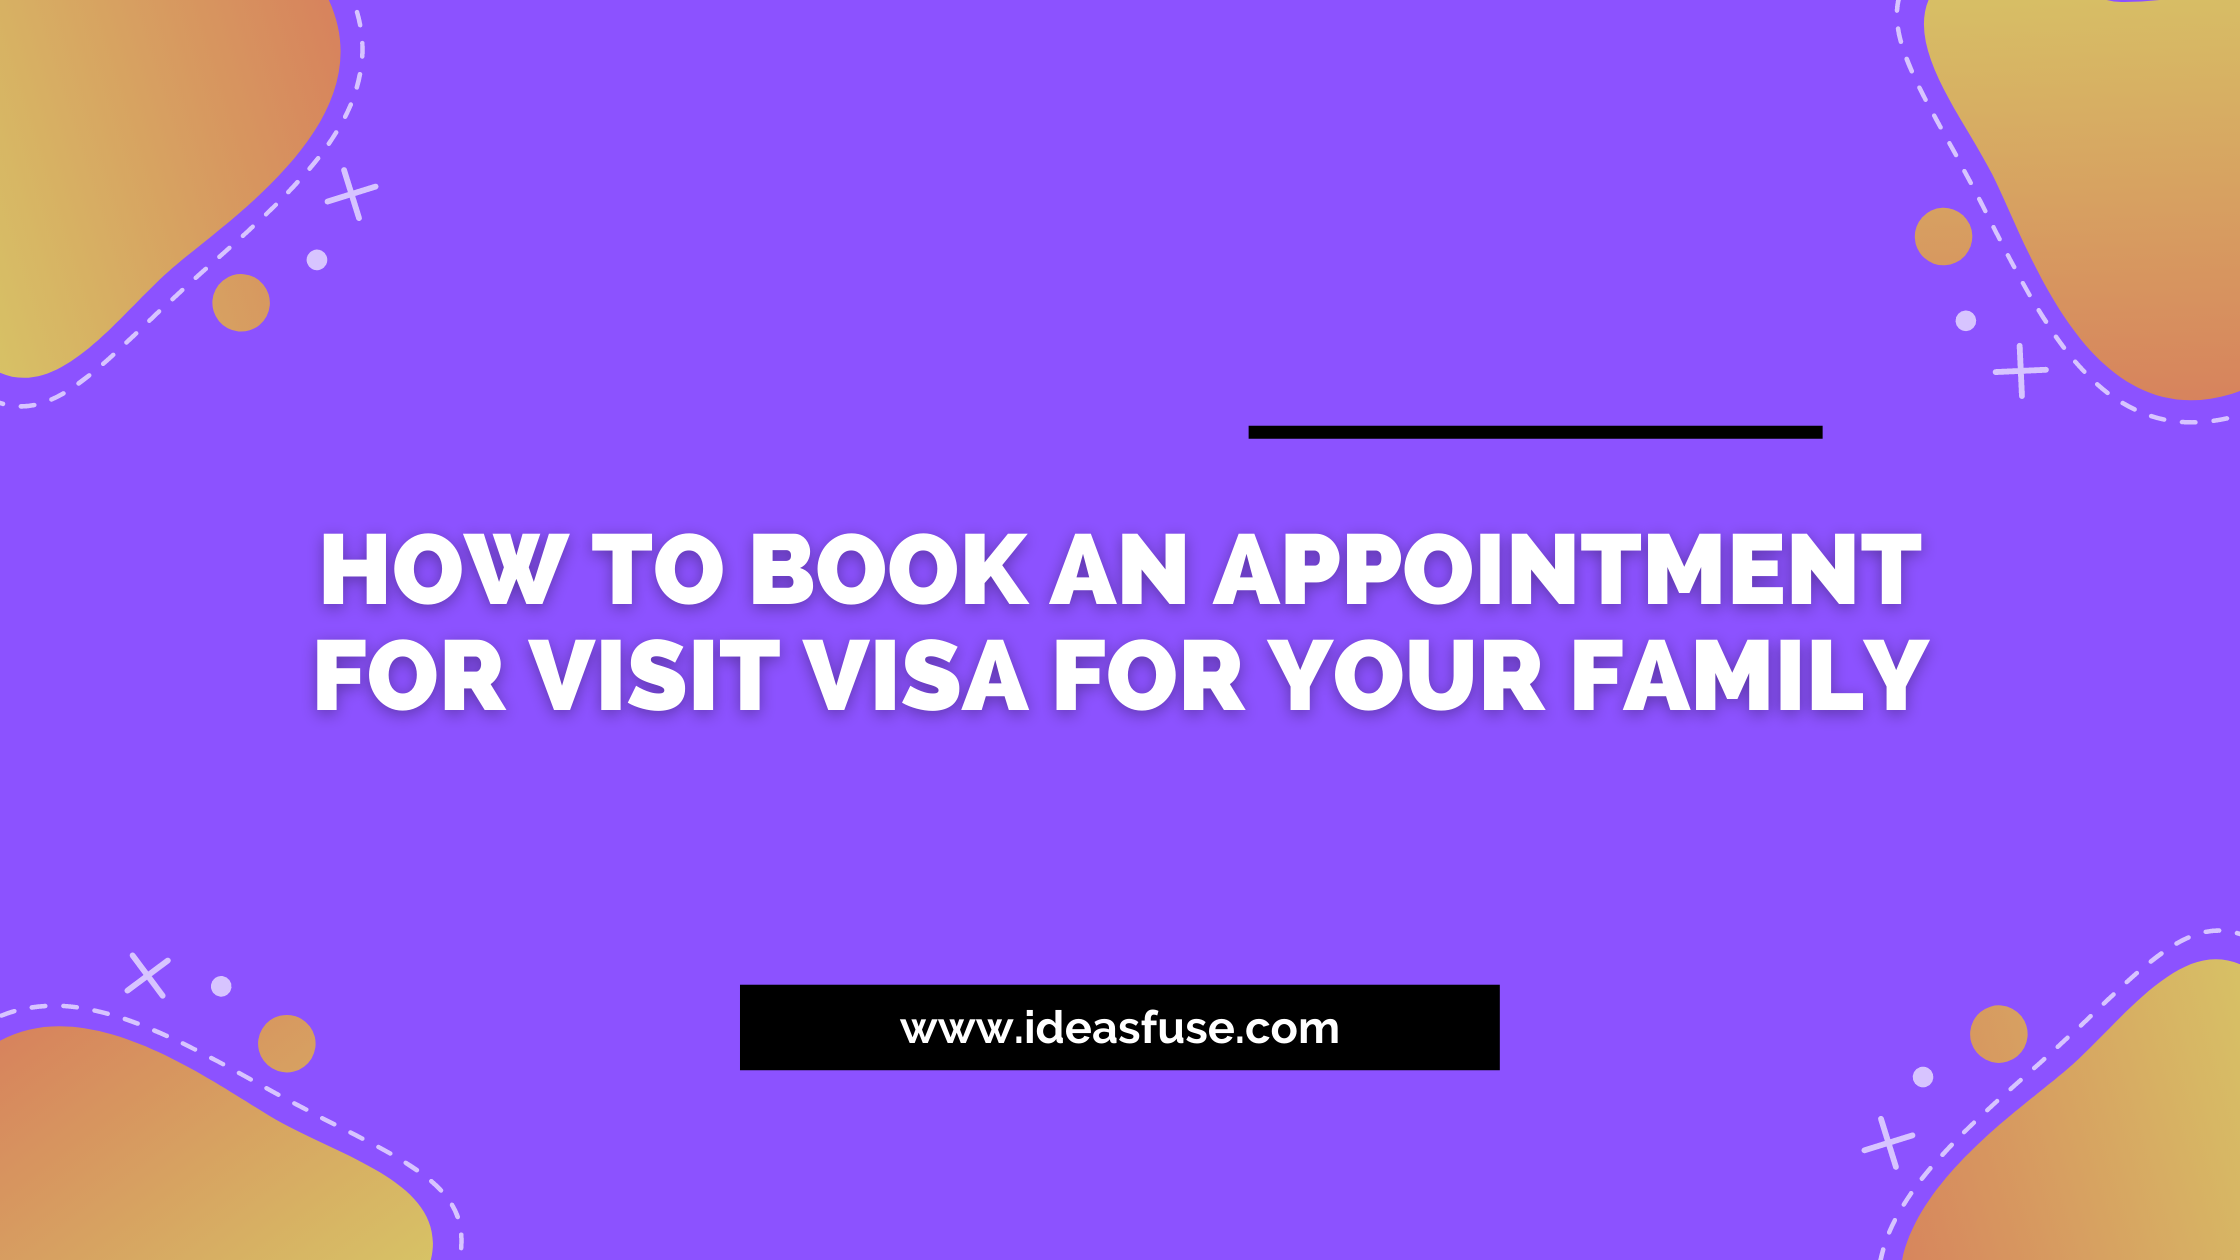 How To Book An Appointment For Visit Visa For Your Family